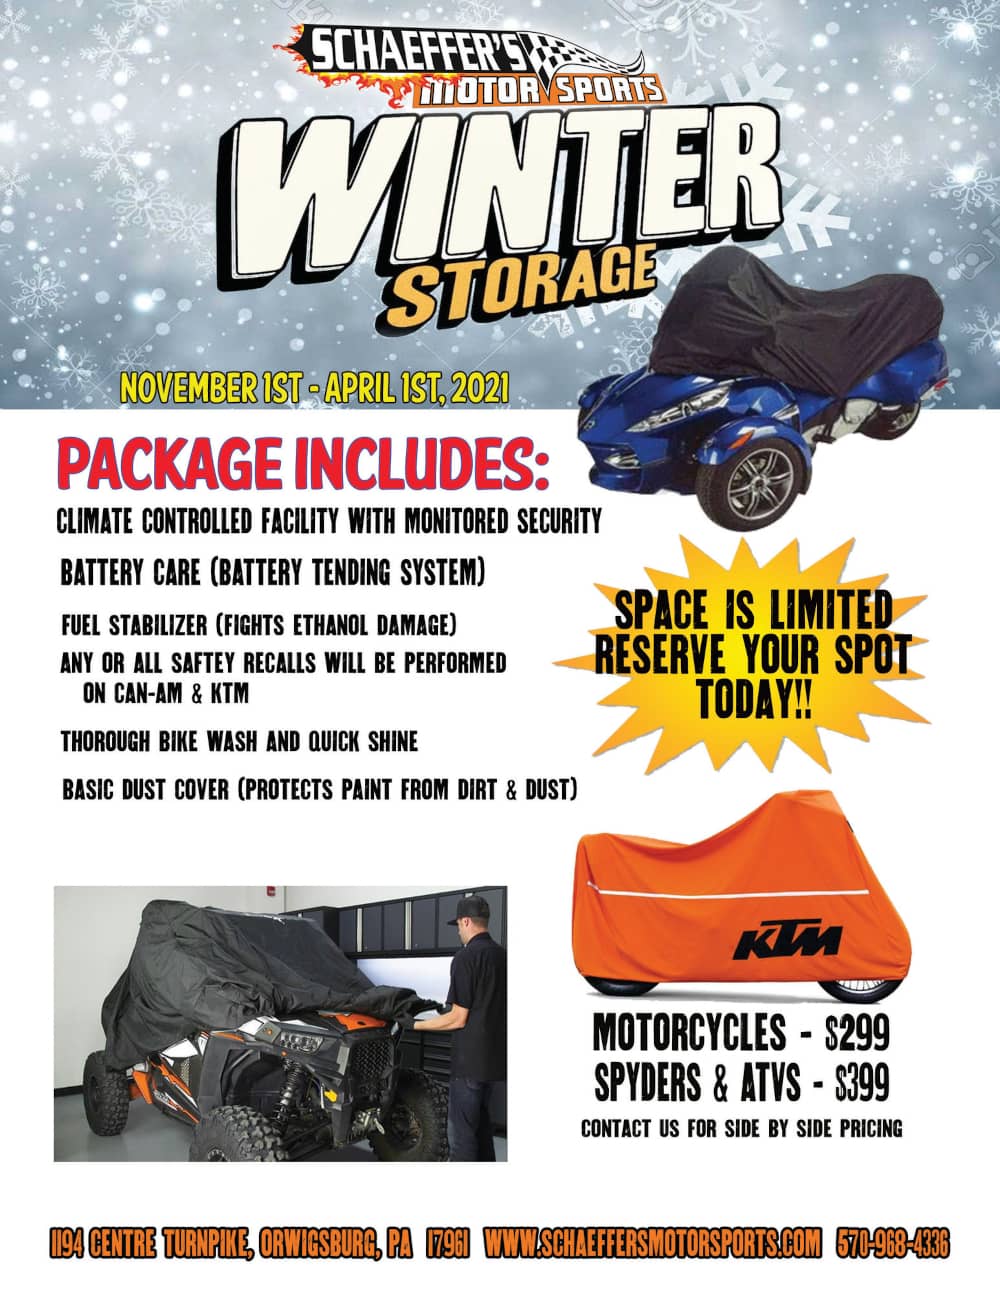 Schaeffer's Motorsports Let Us Pamper Your Baby This Winter!